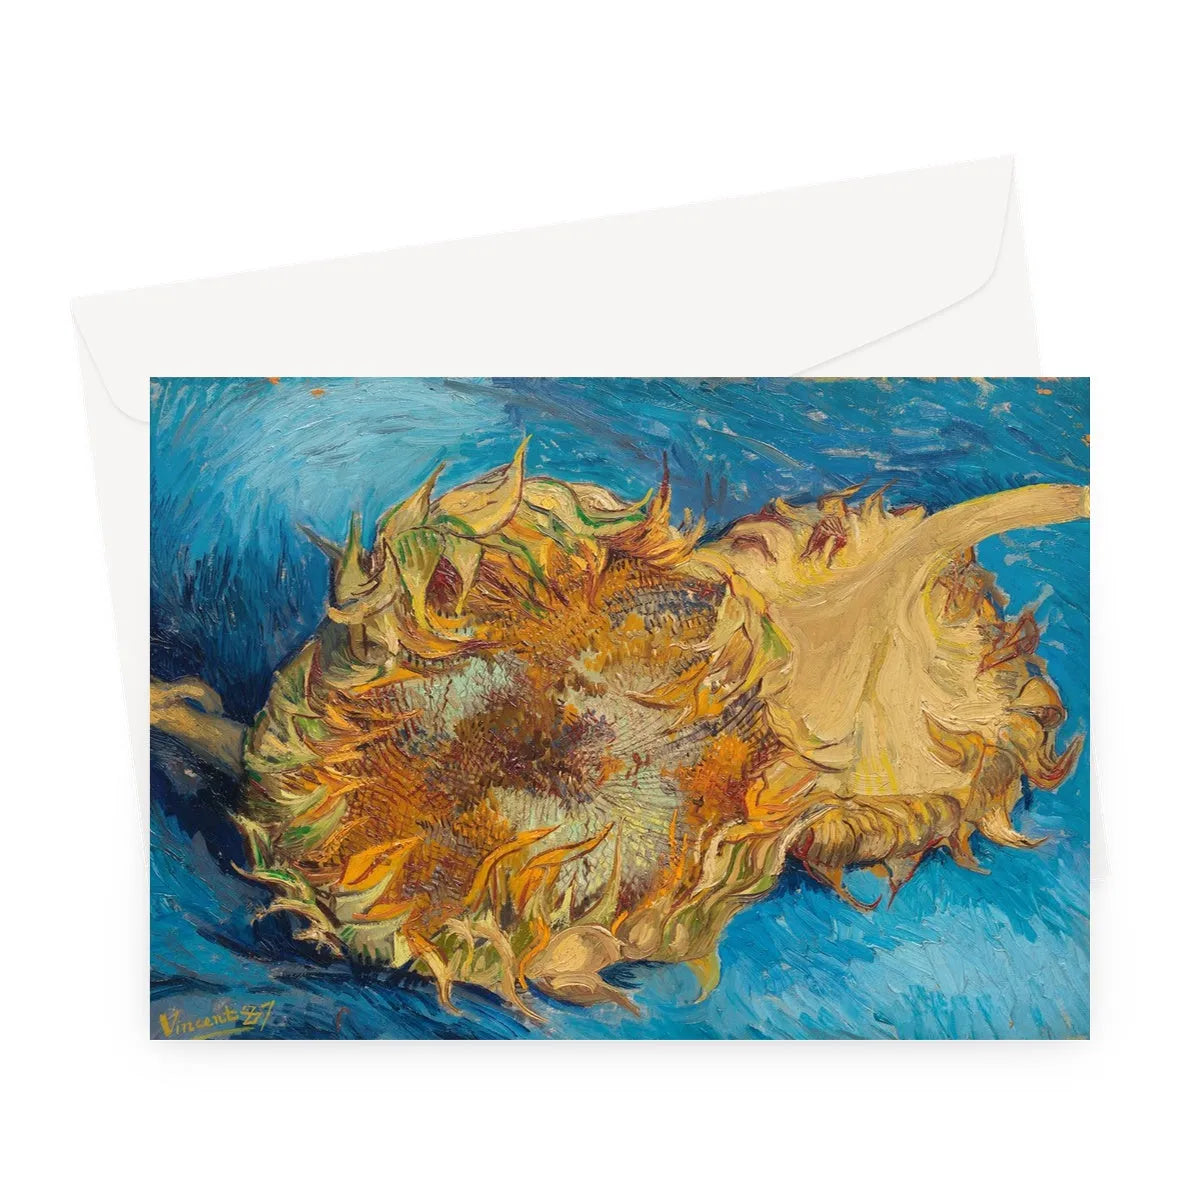 Sunflowers By Vincent Van Gogh Greeting Card - A5 Landscape / 1 Card - Notebooks & Notepads - Aesthetic Art